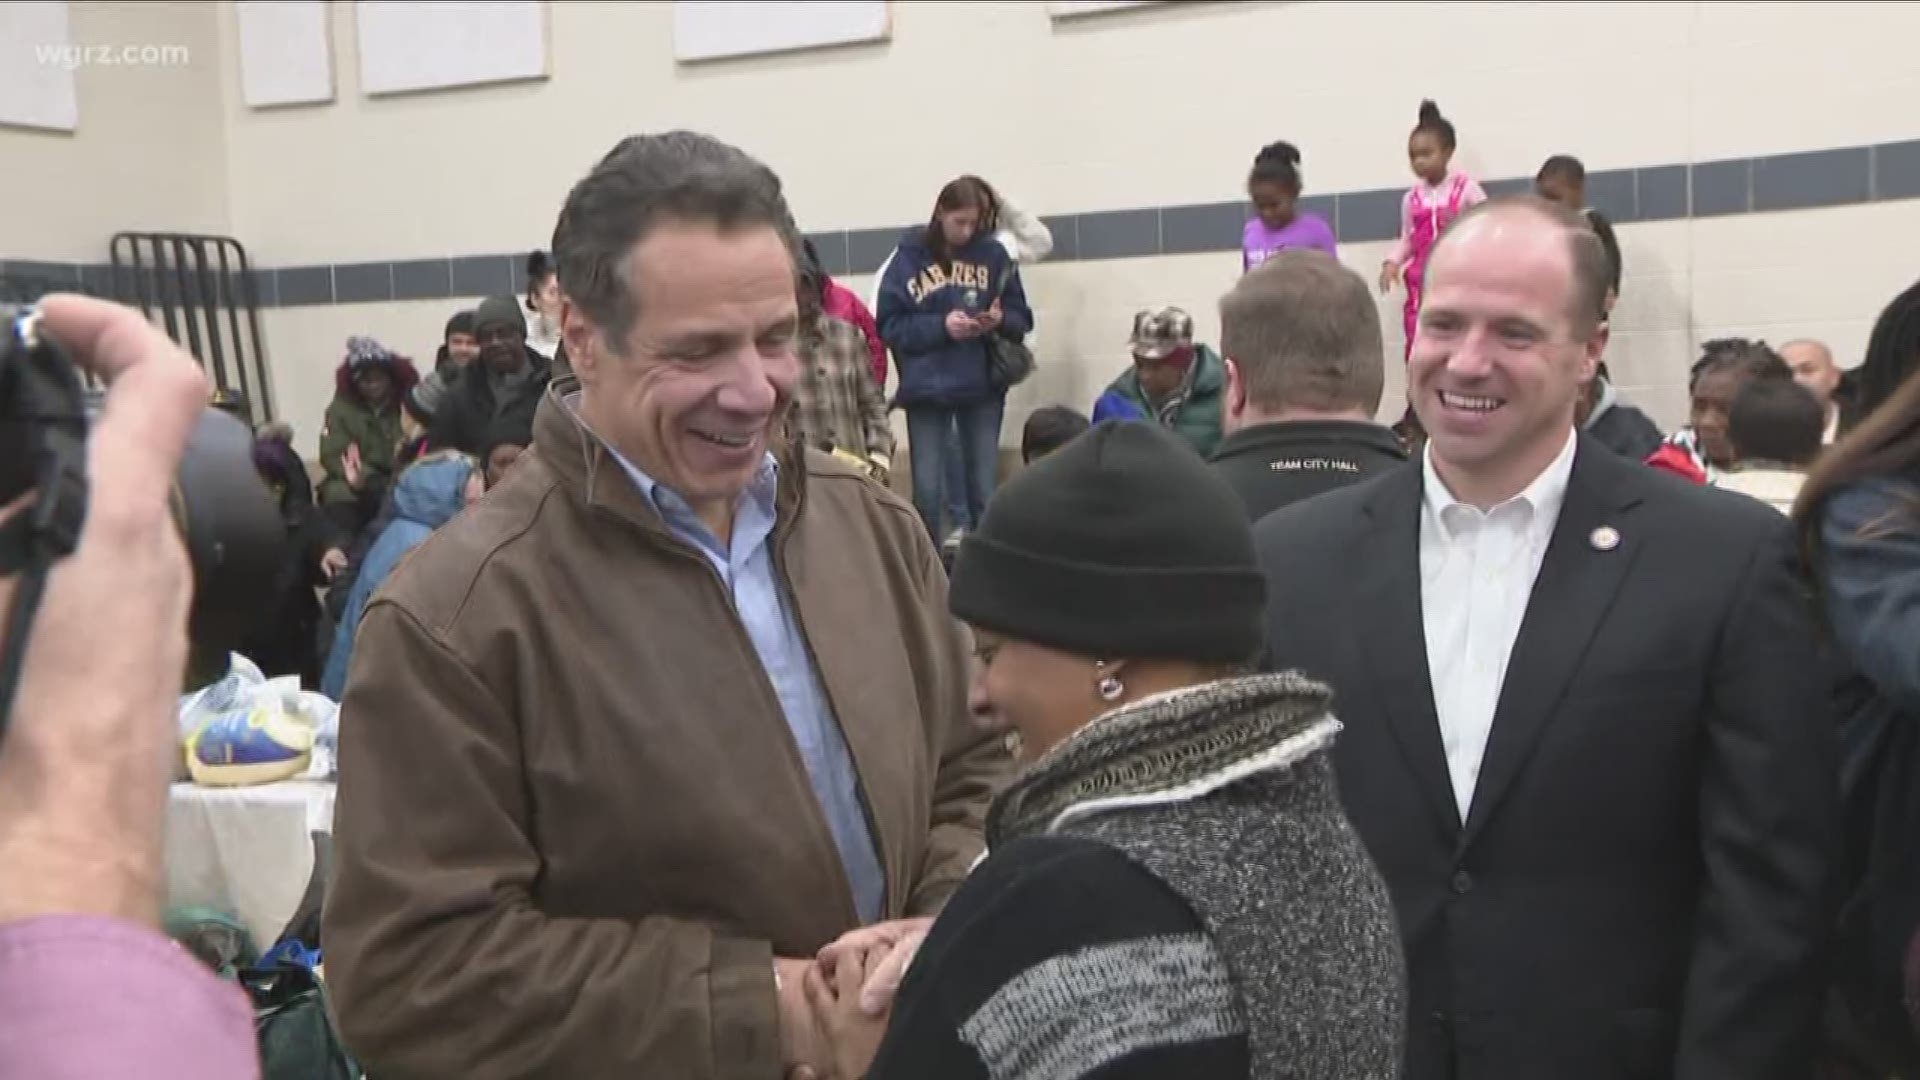 Associated Press: Cuomo Contacts Iowans About 2020